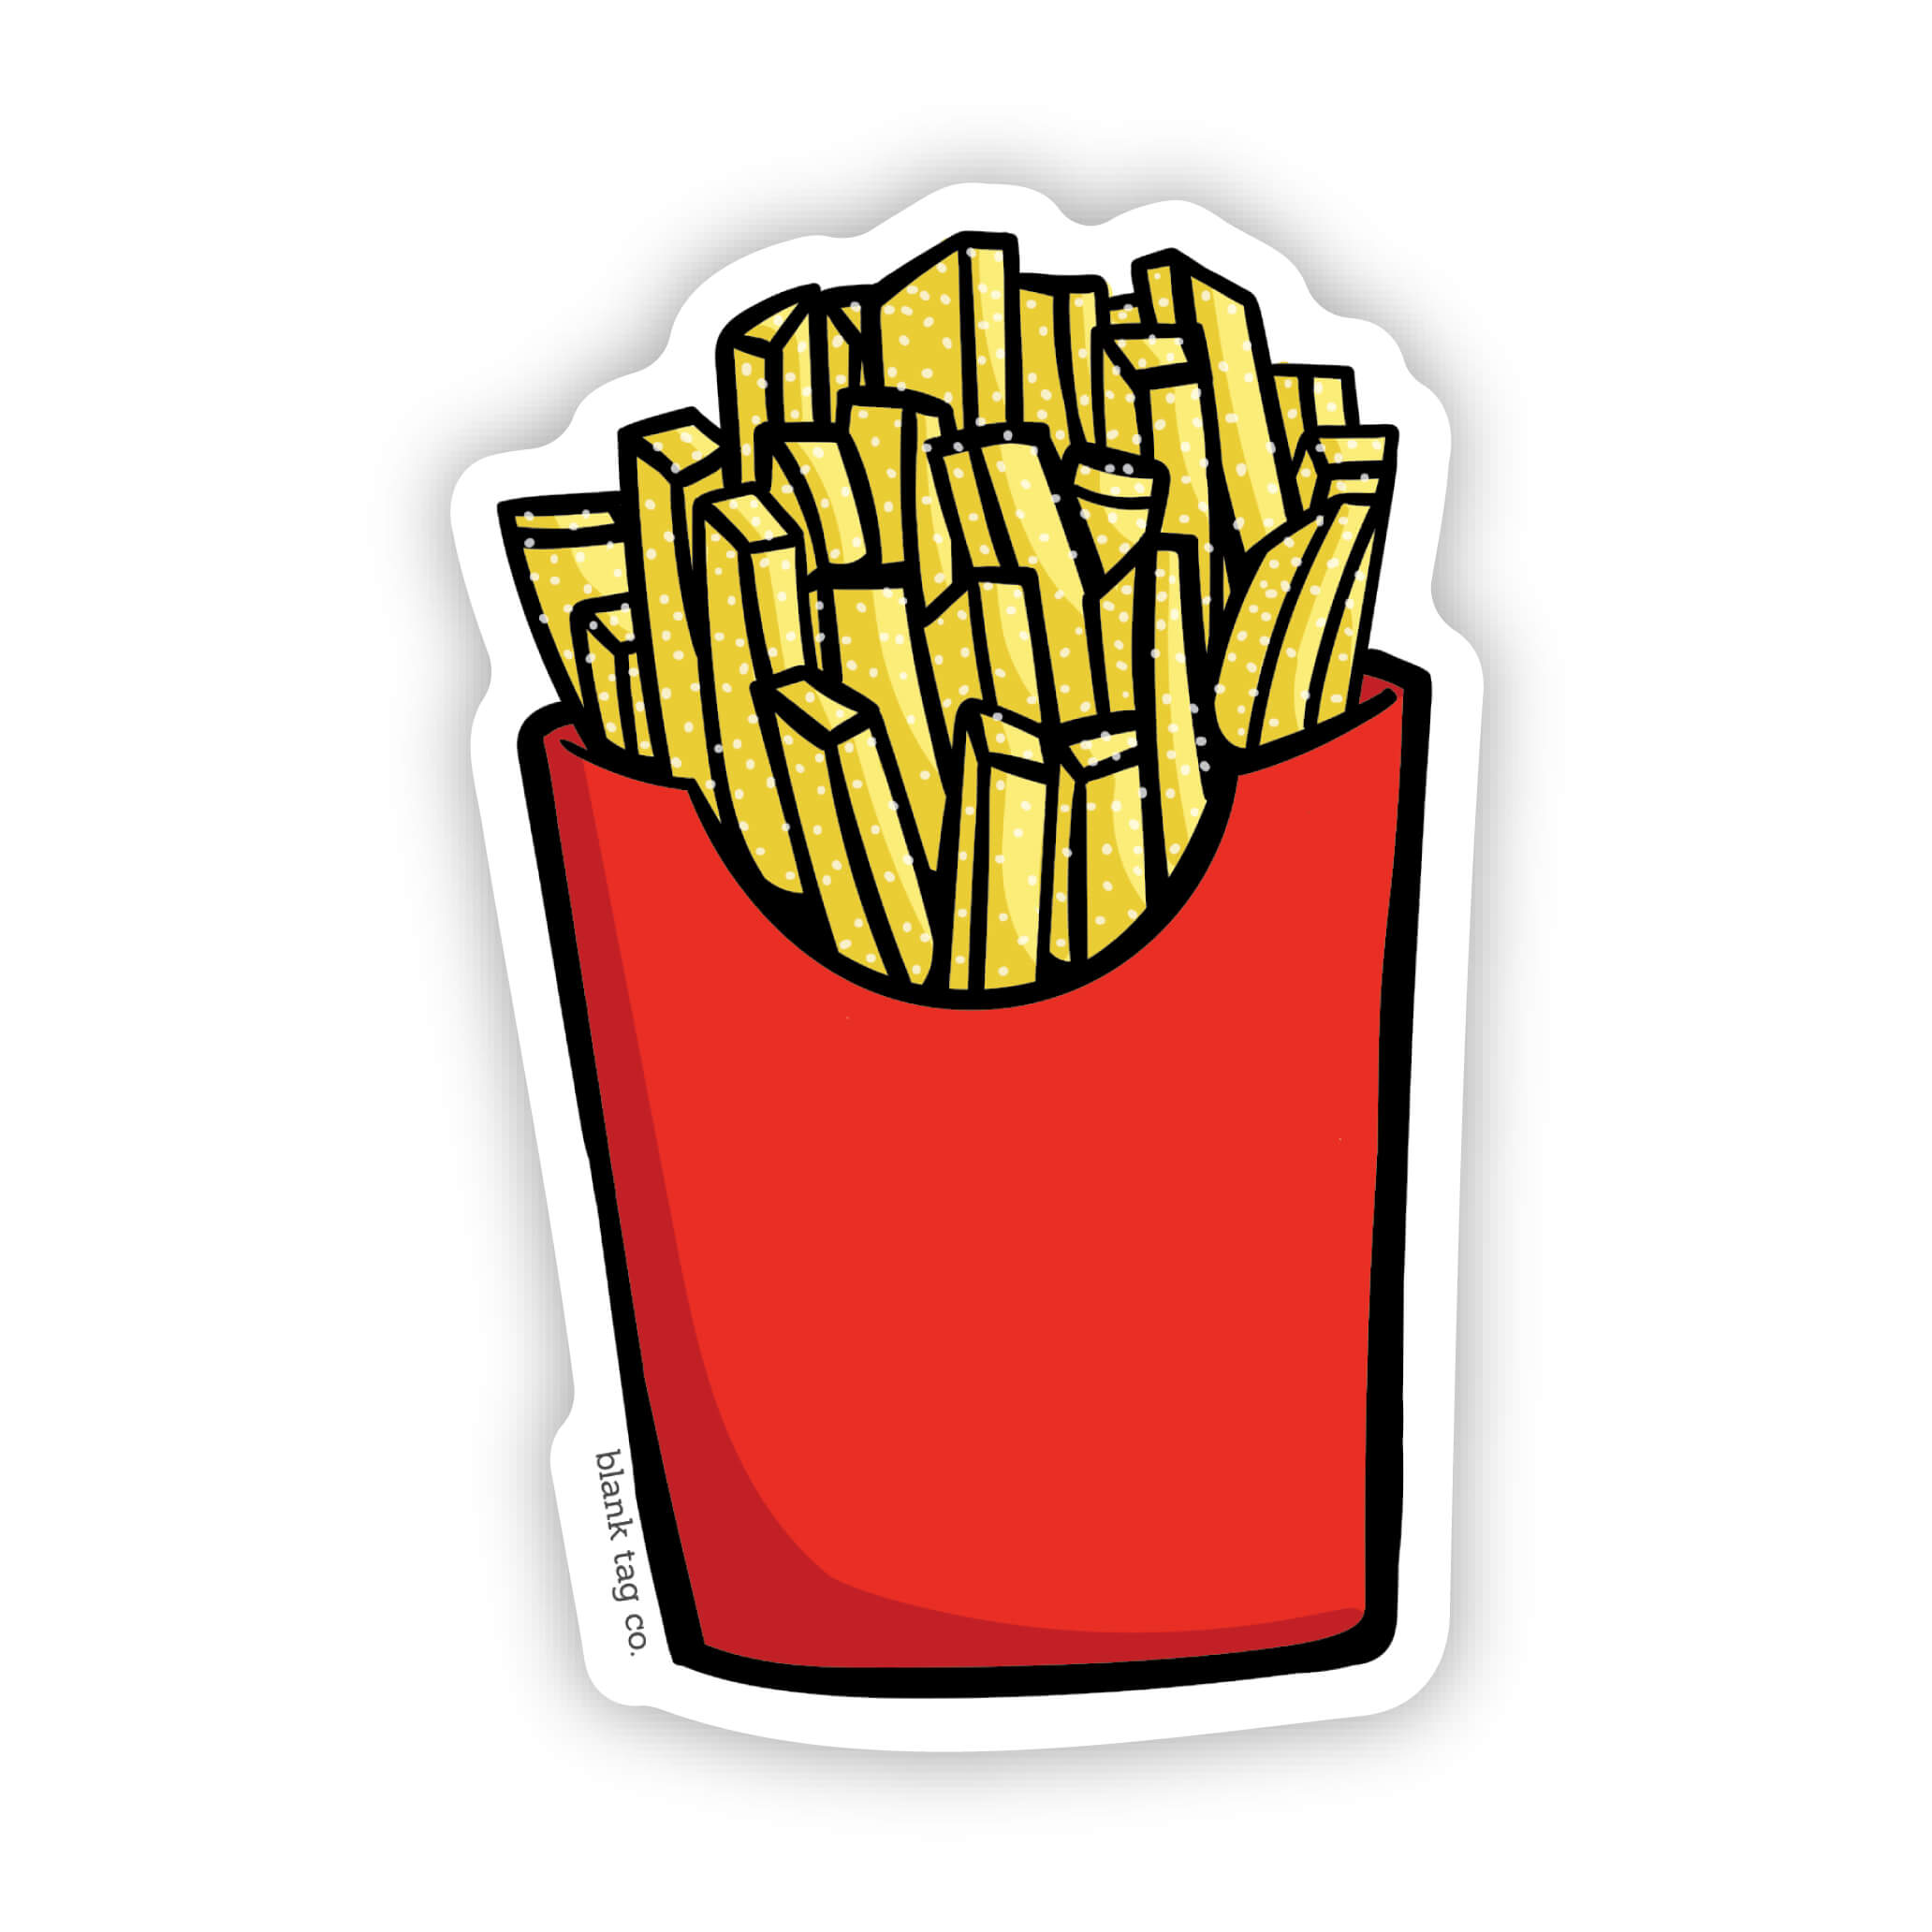 The French Fries Sticker